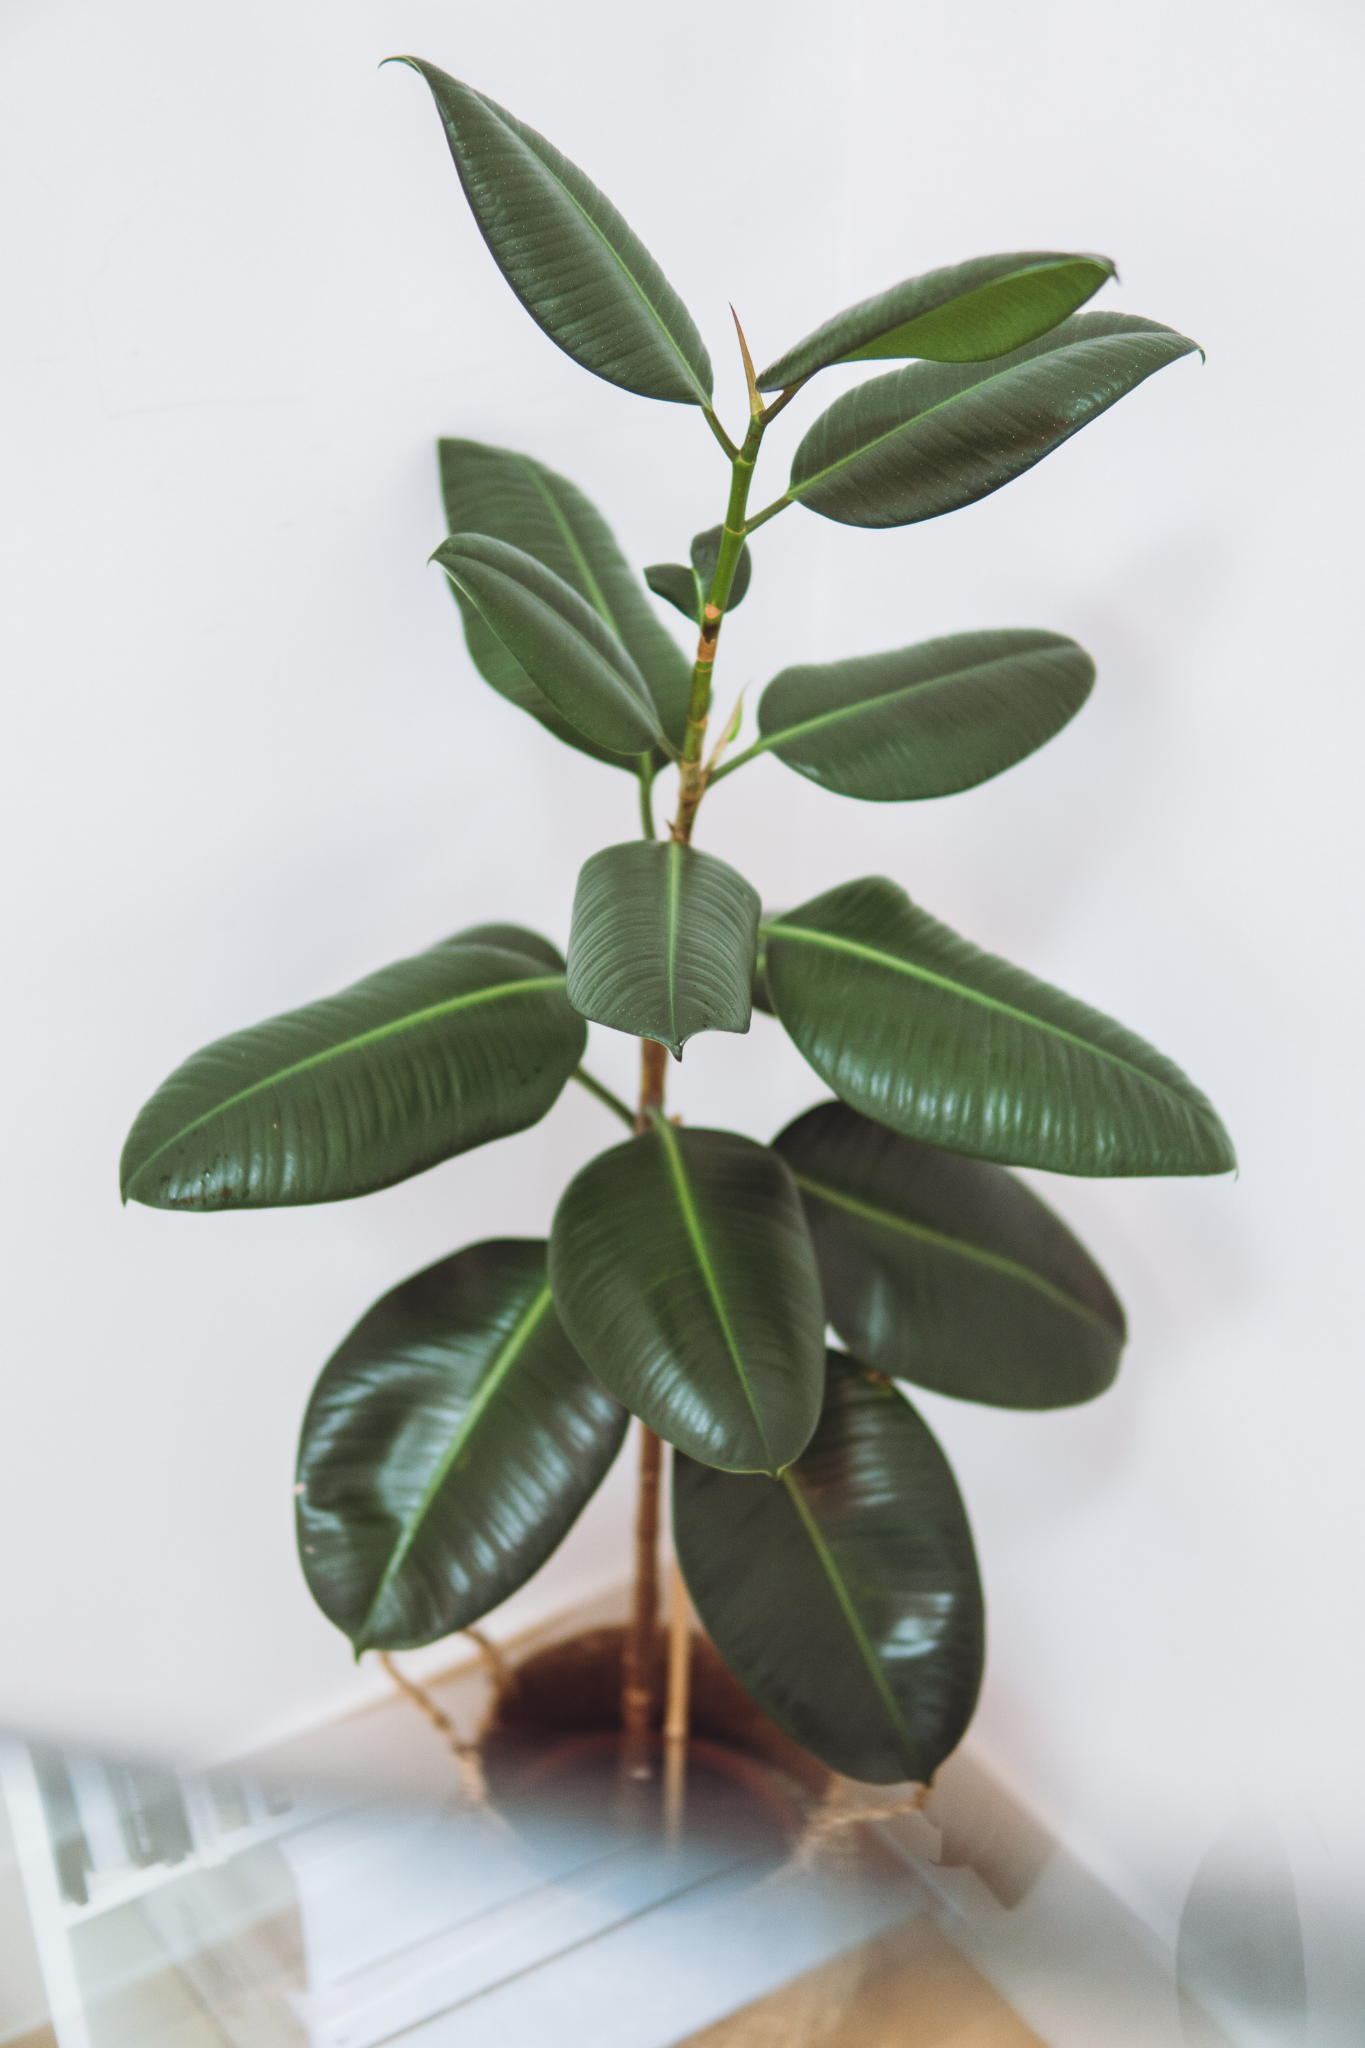 15 Up-and-coming Trends About House Plants